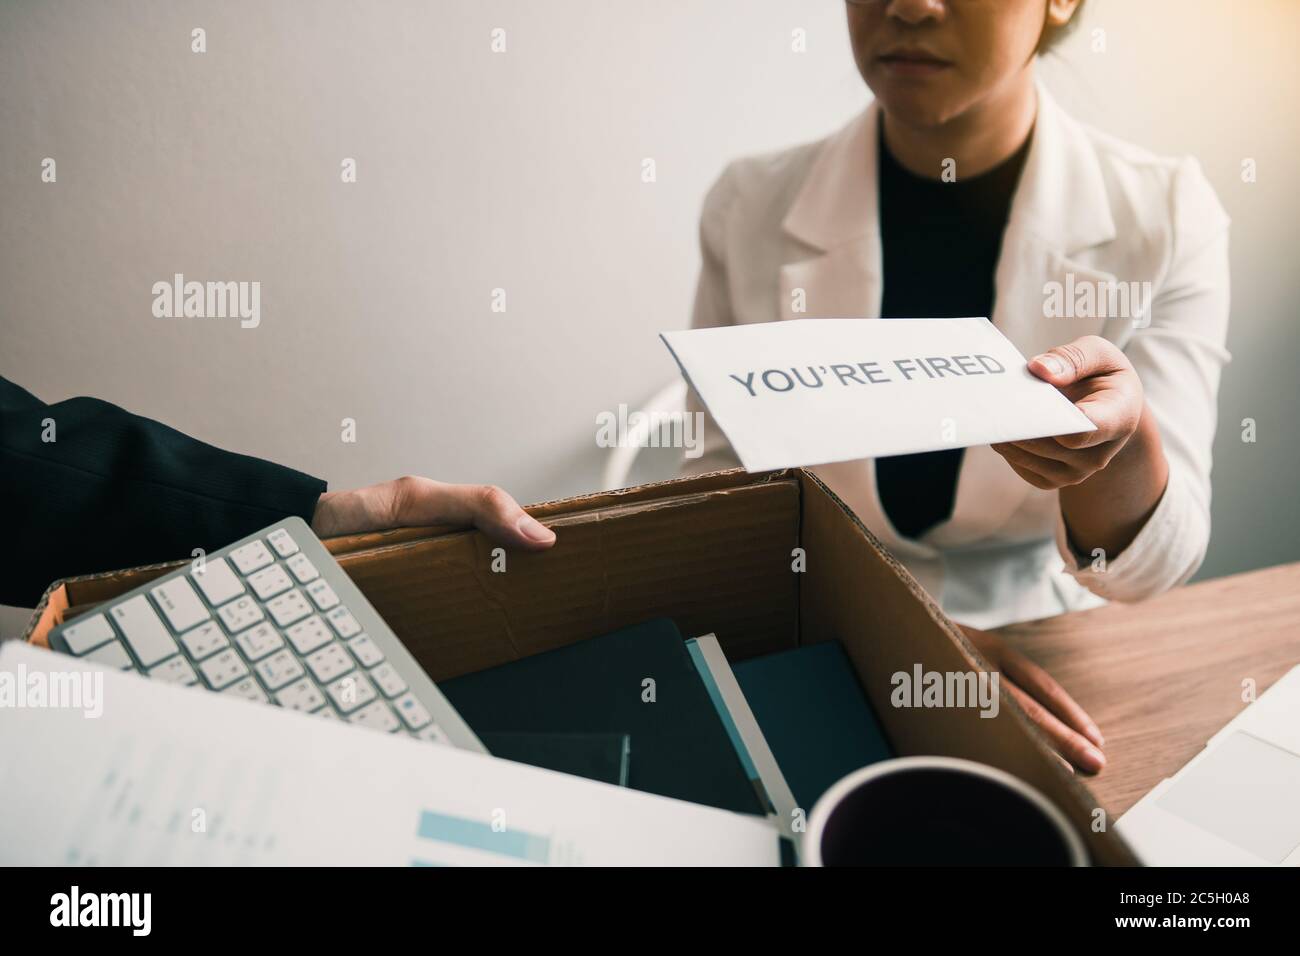 Female Manager Submits A Resignation Letter Or Envelope To The Male Employee At The Office Stock Photo Alamy